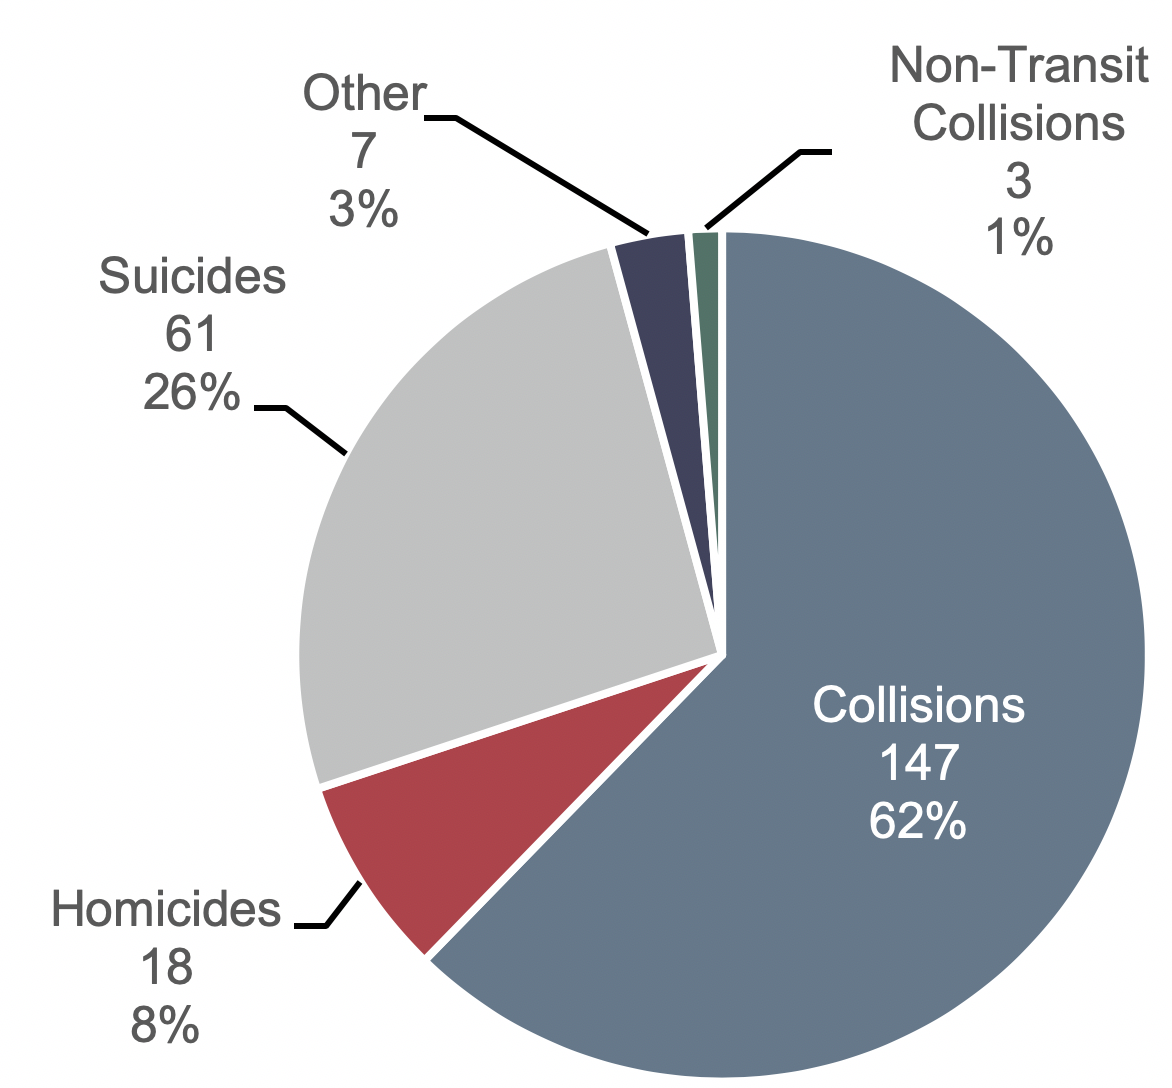 A pie chart shows the percentage of transit fatality events by type. The total number of transit fatalities in 2014 was 236. There were 147 transit fatalities from collisions in 2014, representing the largest percentage of the total (62%). The second-largest percentage came from suicides, representing 26% of all transit fatalities in 2014. The third-largest percentage came from homicides, representing 8%. The smallest number of transit fatalities came from 'other' and non-transit collisions, representing 3% and 1%, respectively.